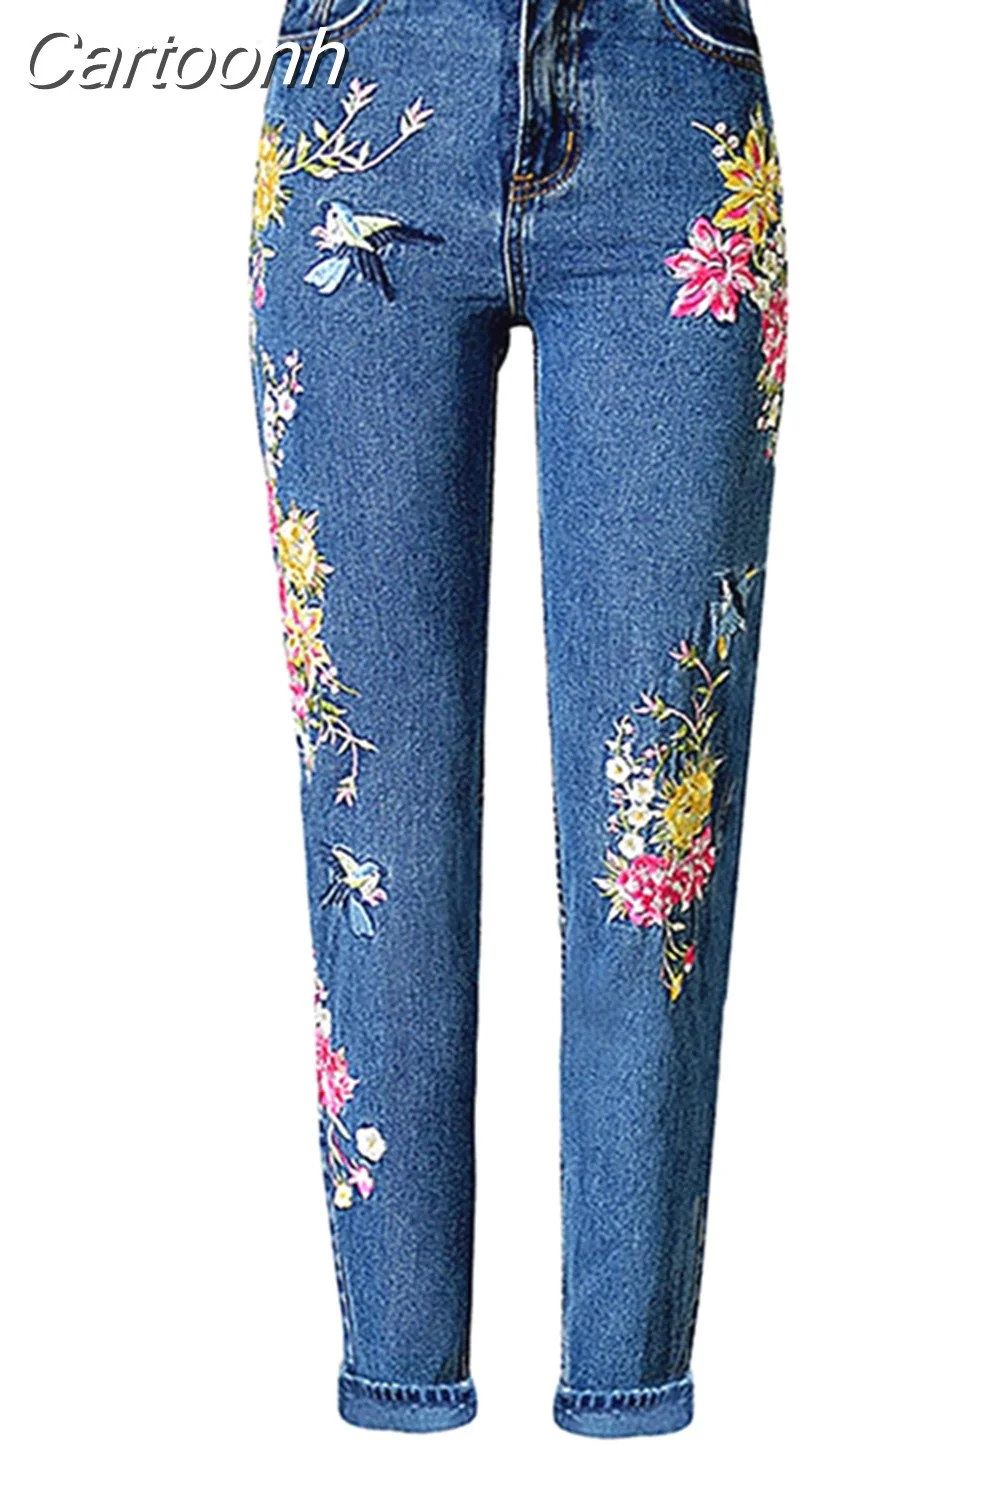 Cartoonh Fashion Spring Street Style Denim Pant Women Straight Long Jeans 3D Flowers Embroidery High Waist Trousers Female